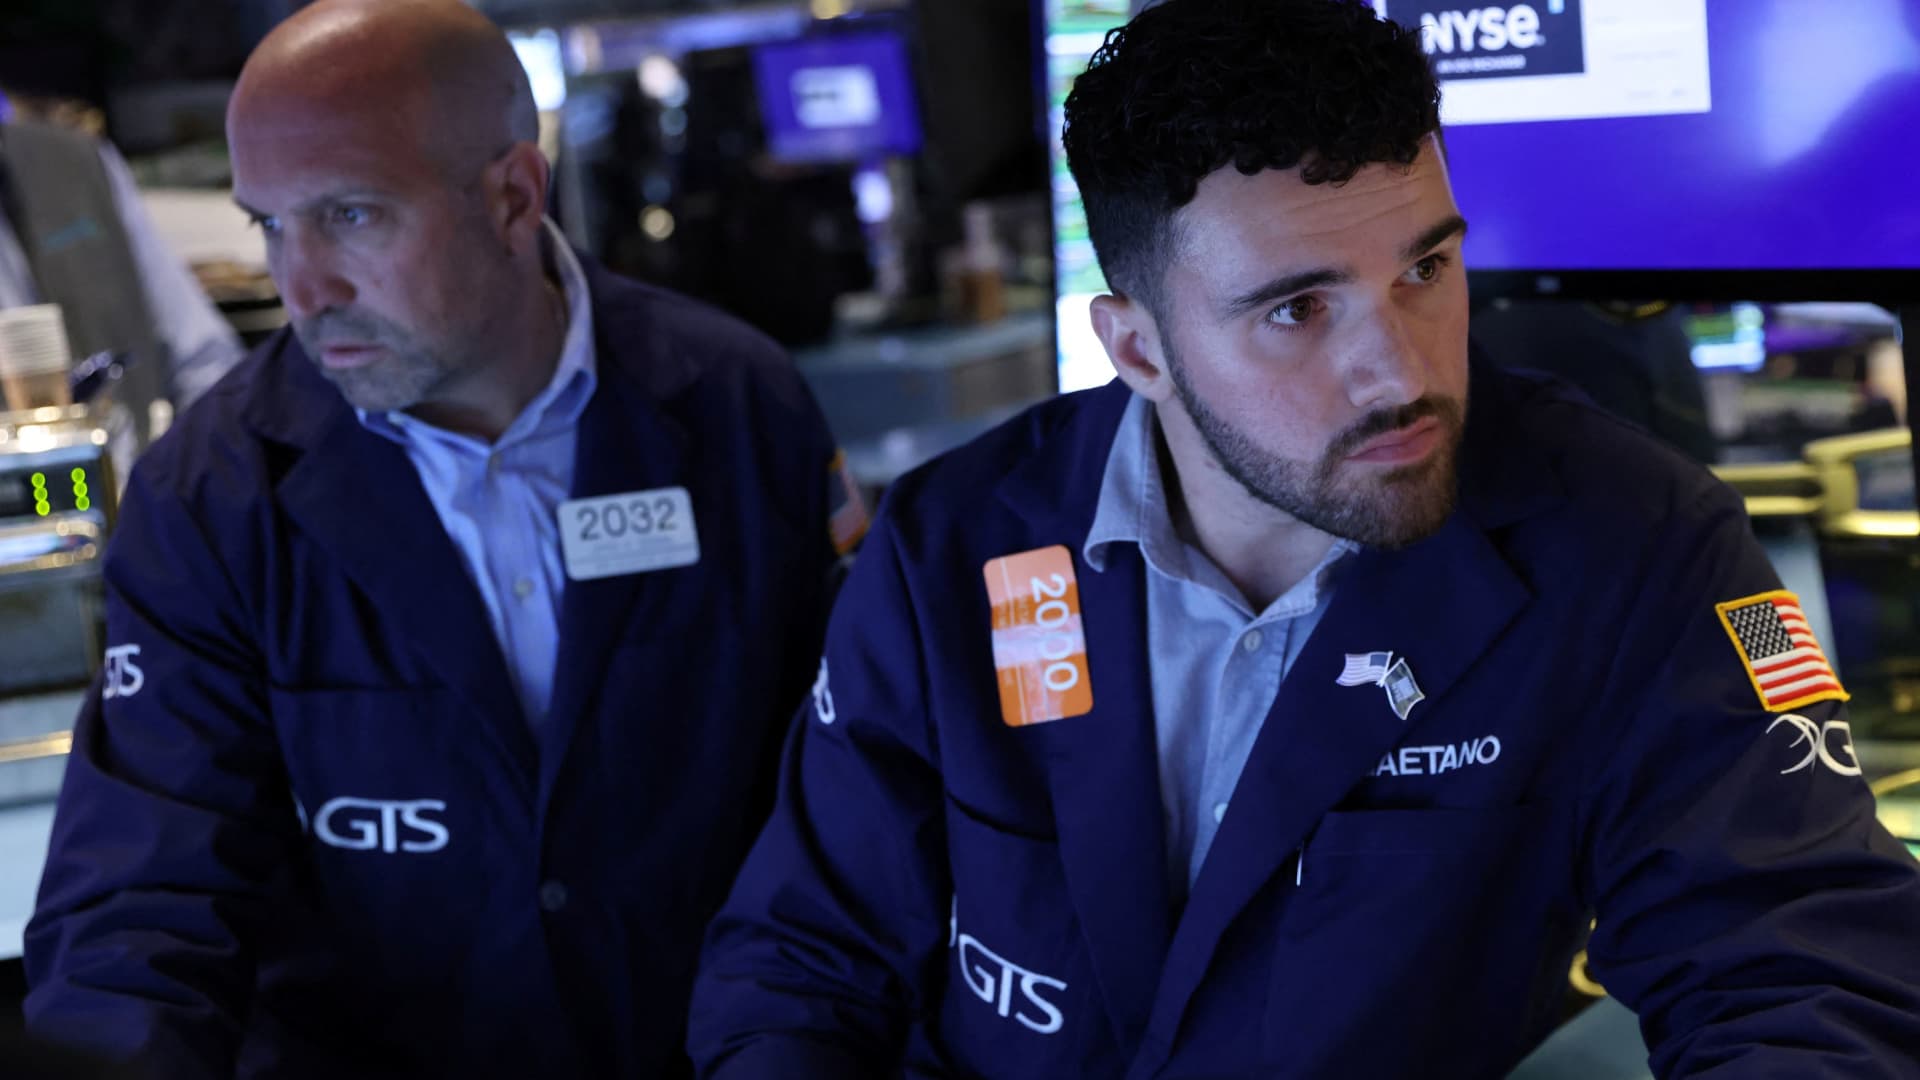 Stocks open higher, as S&P 500 tries to snap 5-day losing streak